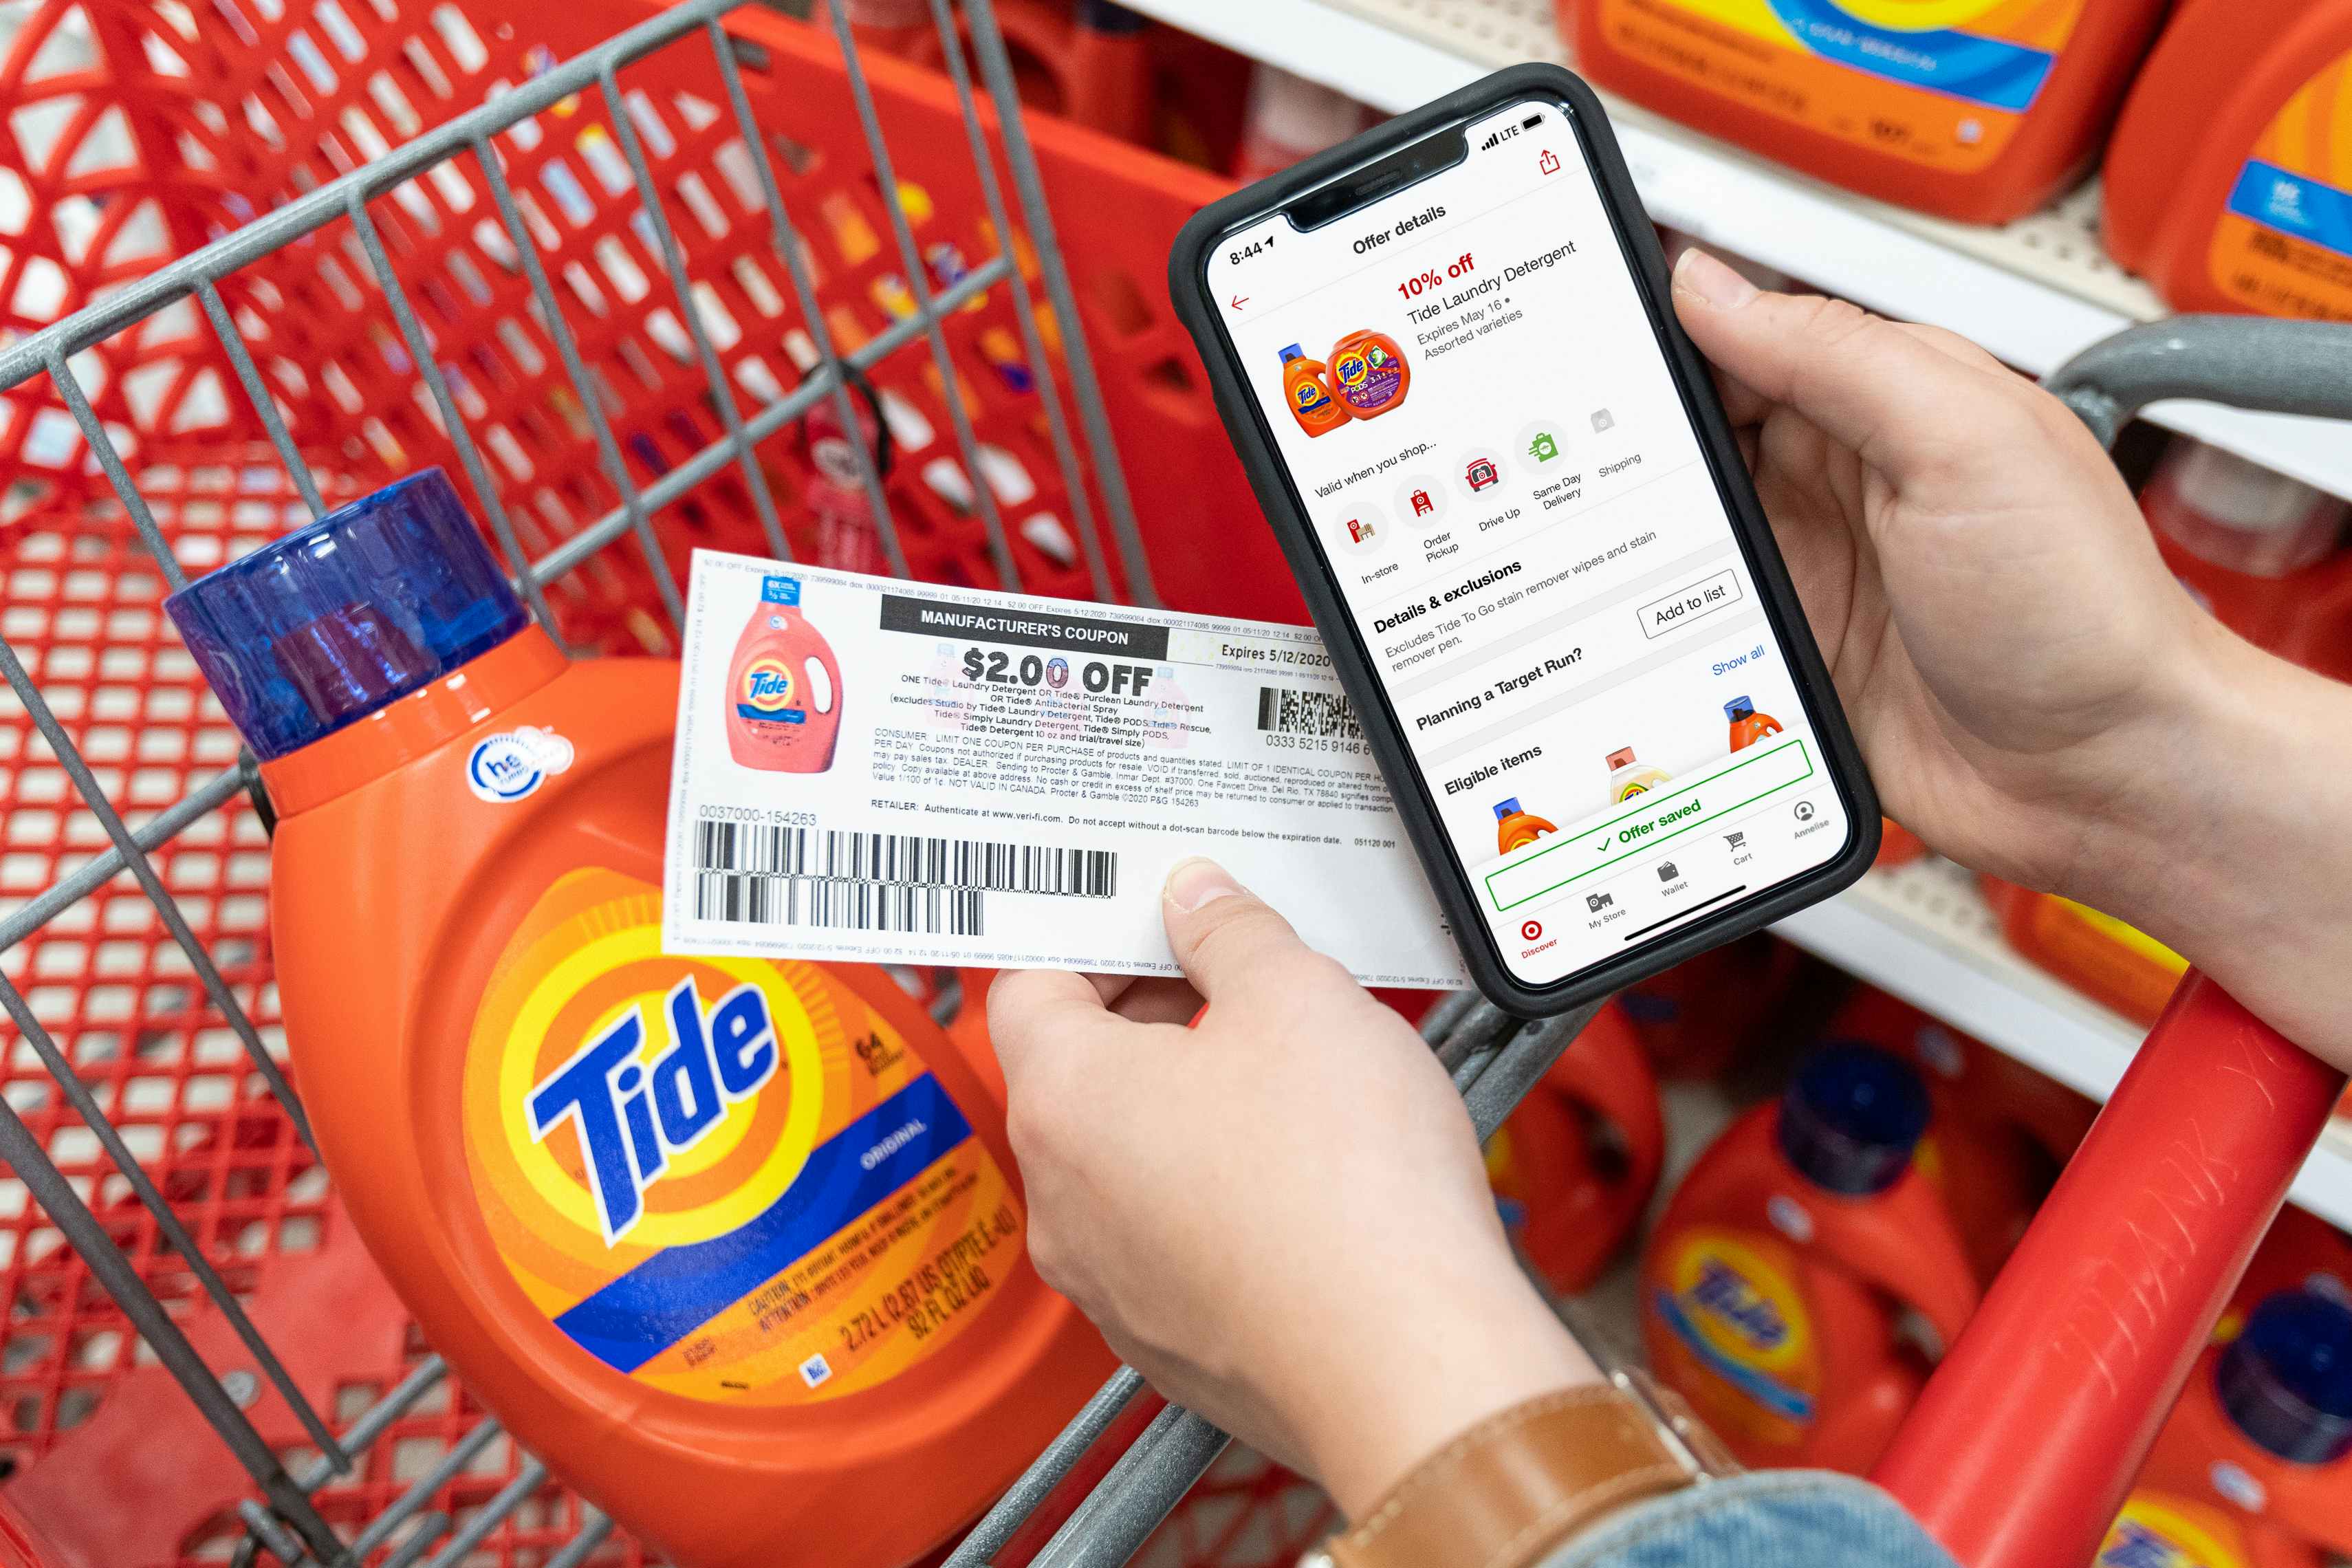 A person's hands holding a cell phone displaying 10% off Tide laundry detergent on the target circle app and a $2 off manufacture ...